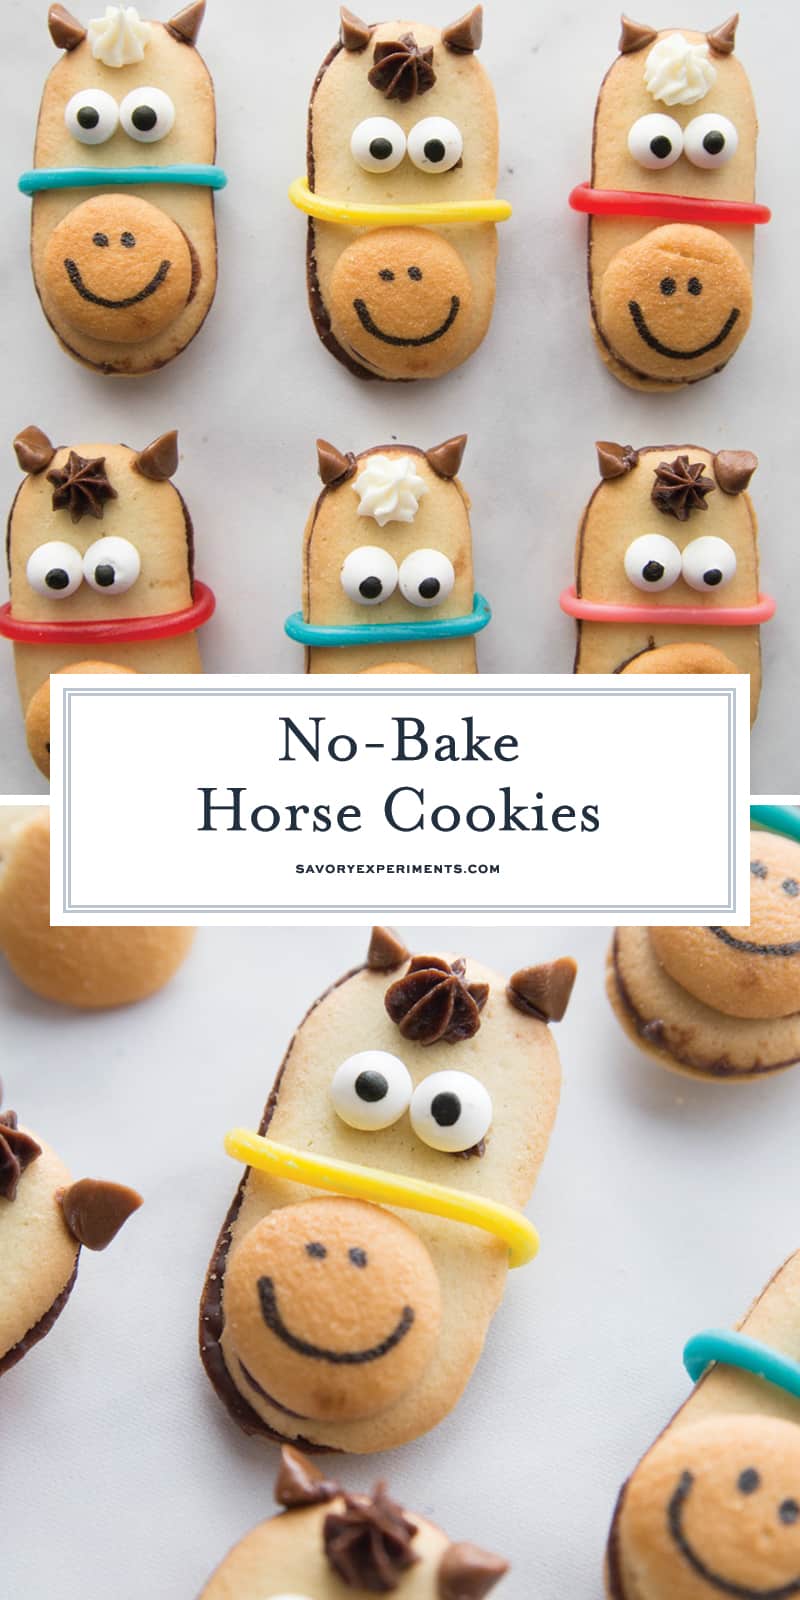 No Bake Horse Cookies are perfect for a Kentucky derby party, triple crown races, or horse themed parties! These horse cookies are the best no bake cookies! #horsecookies #nobakecookies #kentuckyderbyparty www.savoryexperiments.com